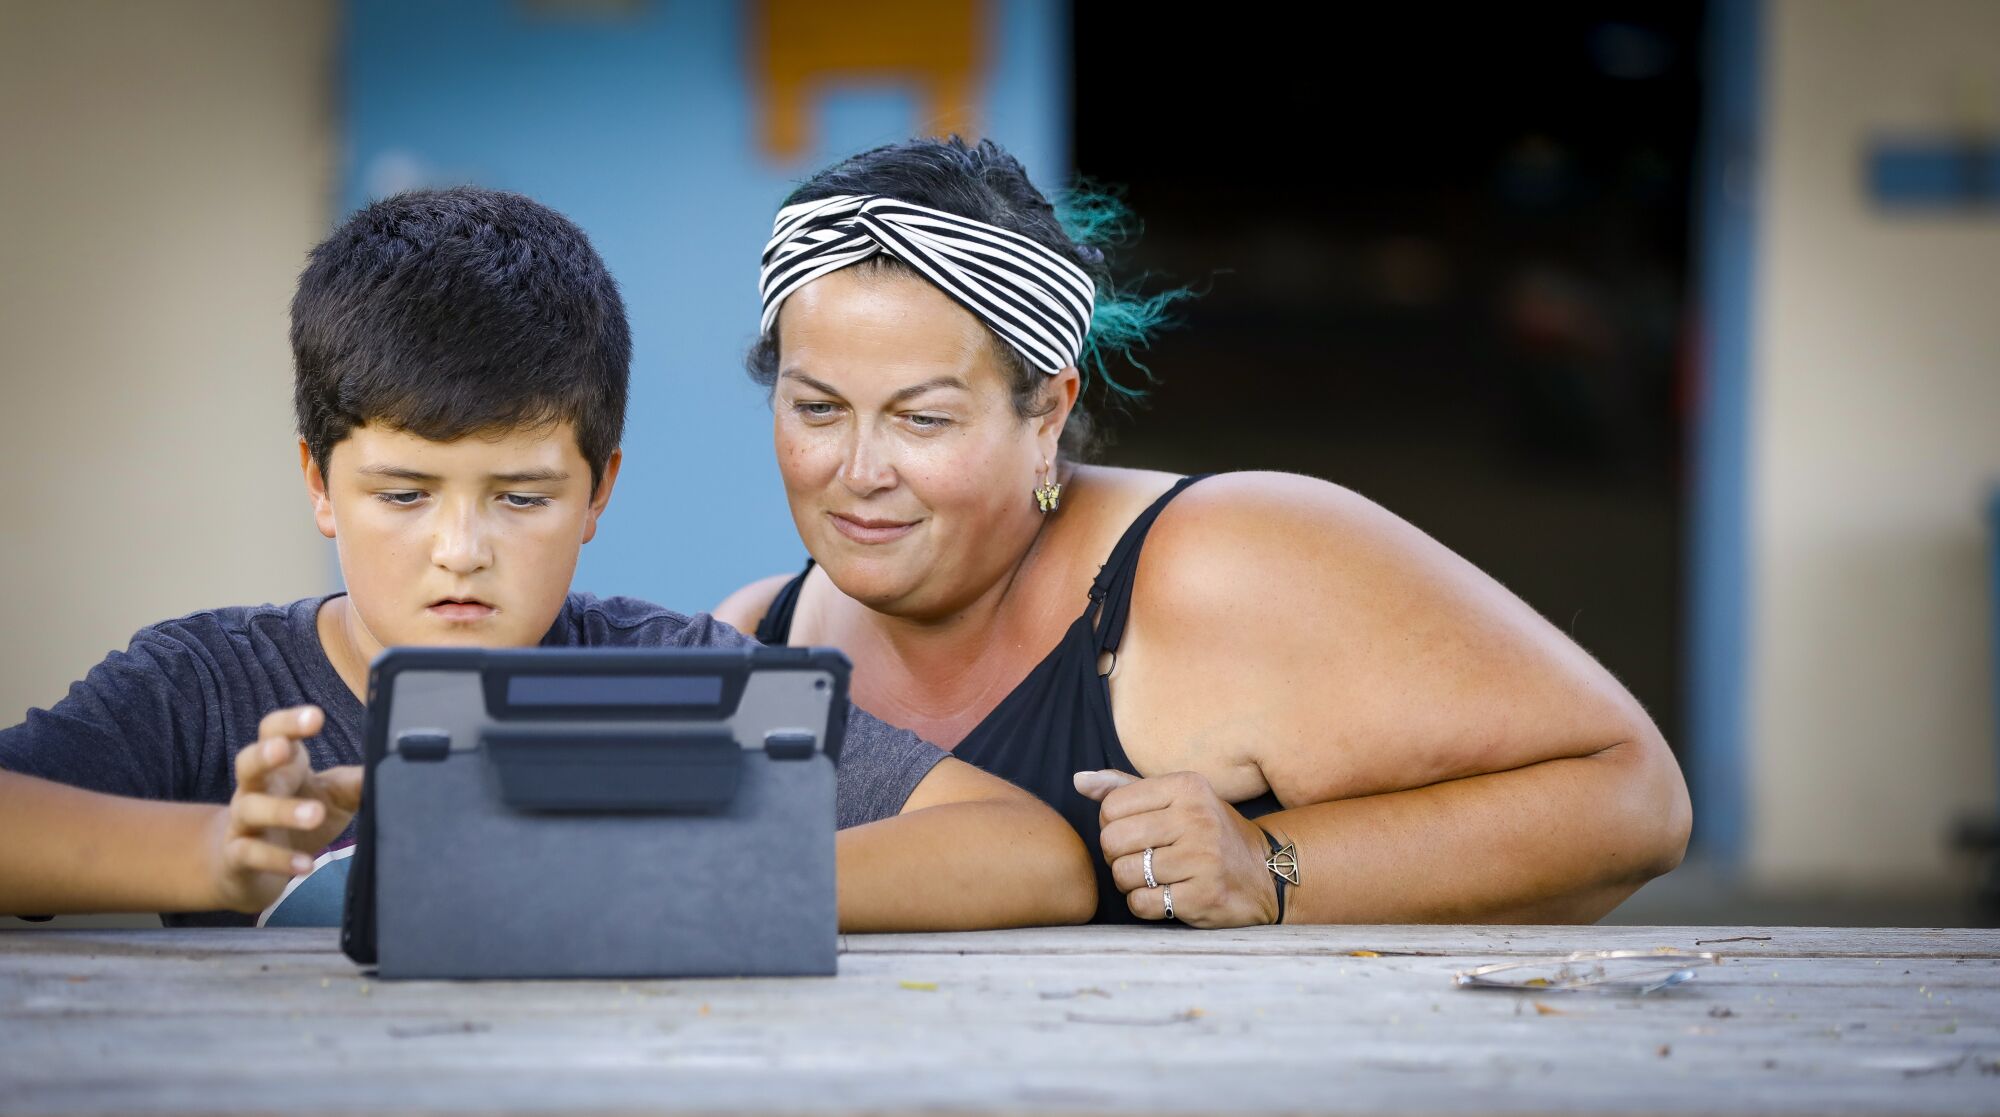 11-year-old fifth grader, Niko Safonov, left, who has epilepsy, and is a student at Ocean Knoll Elementary School in Encinitas, California, does his math homework, as his mom, Melissa Sarenana-Safonov, right, who has adapted her life to provide the best care for him, looks on, September 24, 2019 at the school.